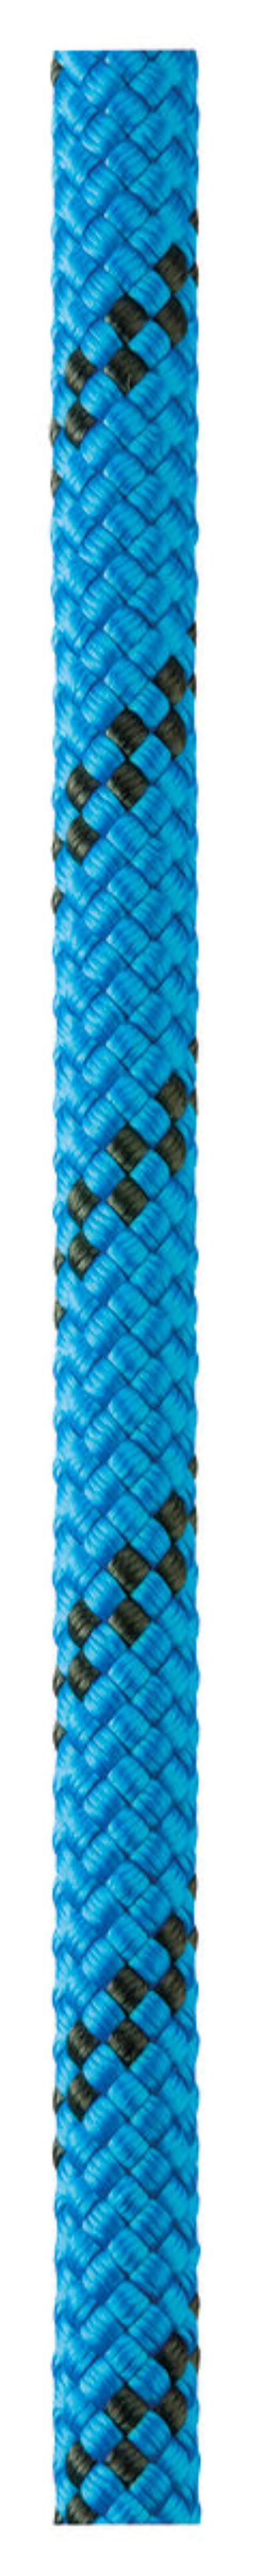 Petzl Low Stretch Kernmantel Rope 150ft Blue, NFPA